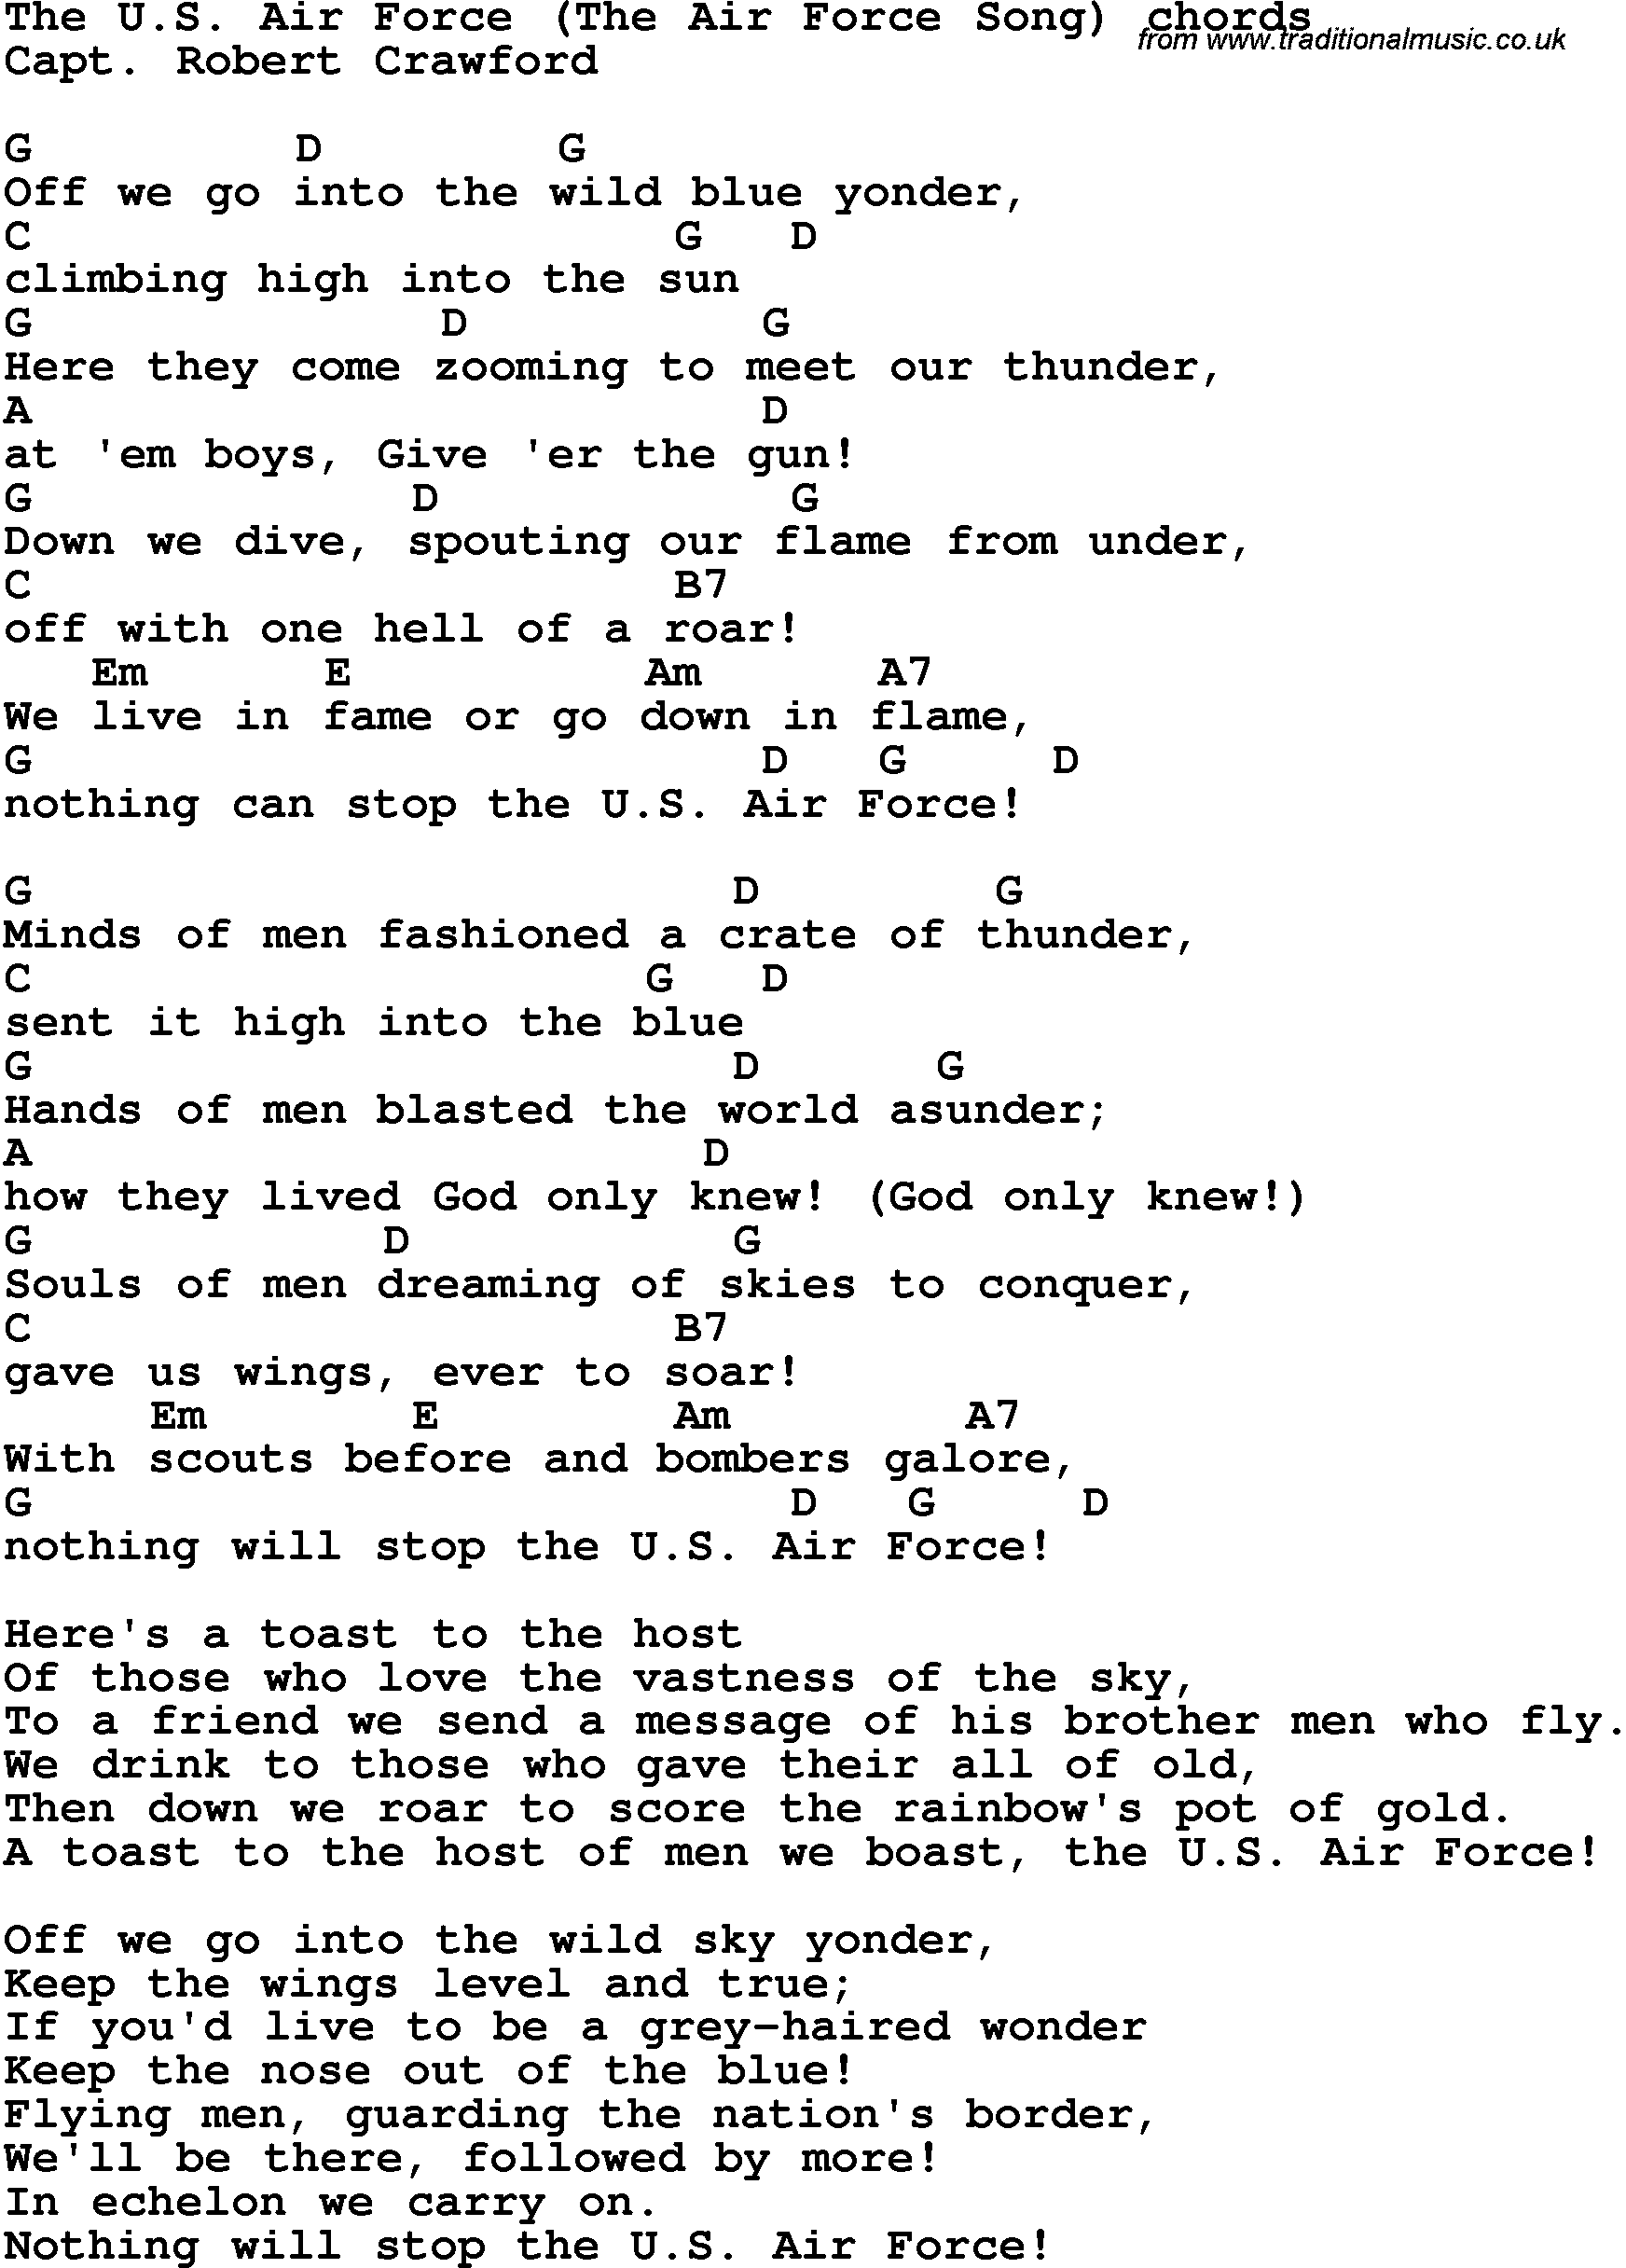 Song Lyrics with guitar chords for The U.s. Air Force